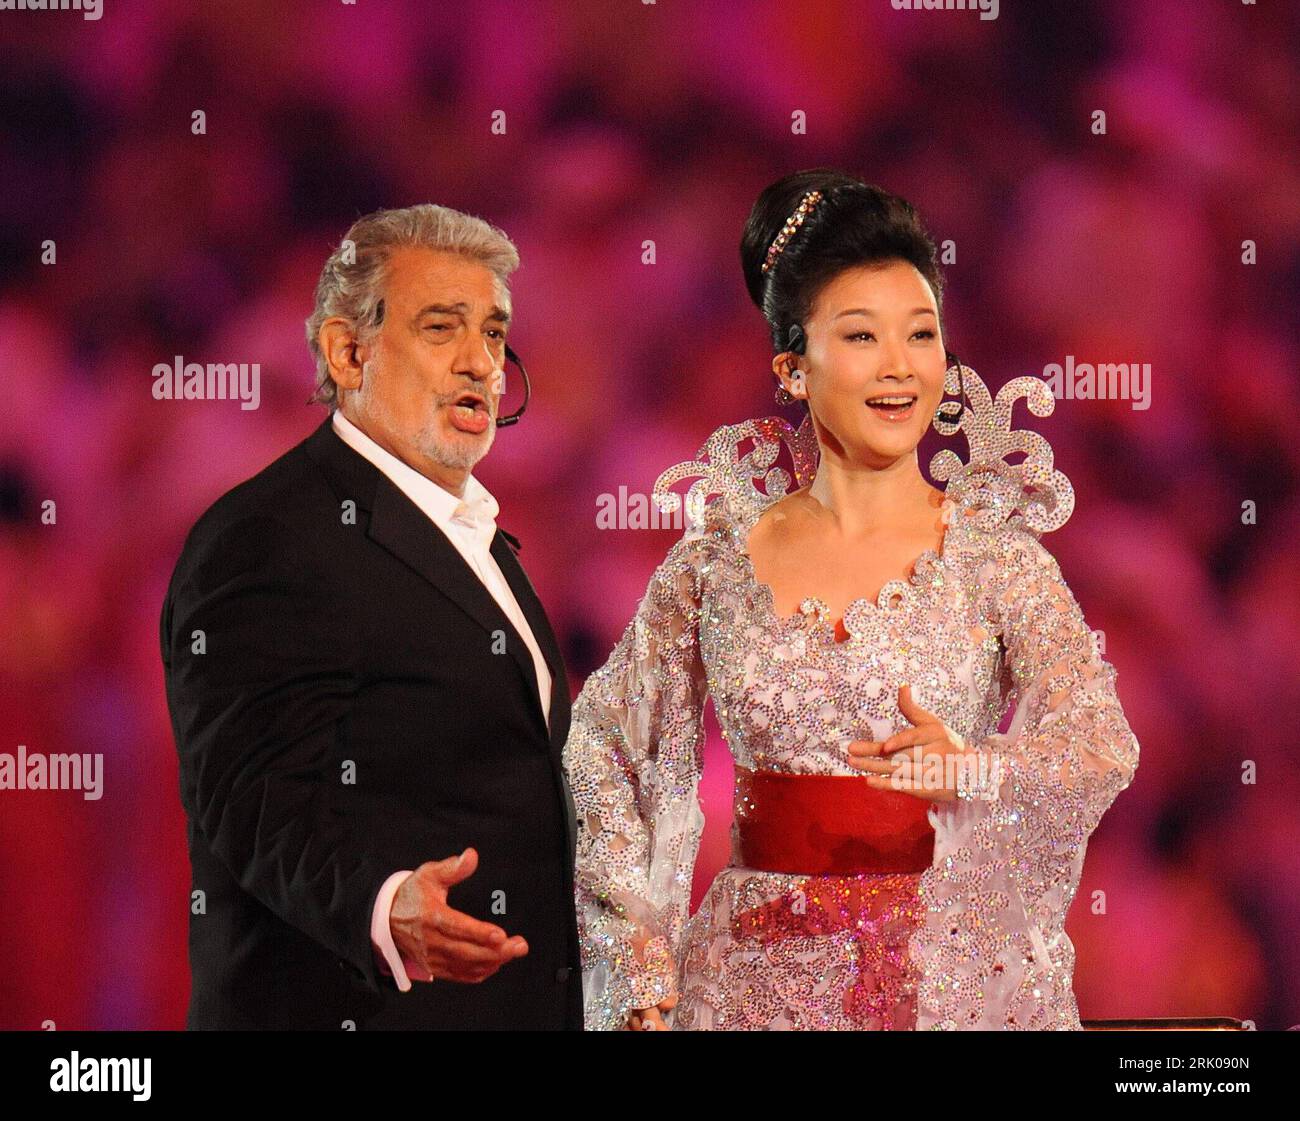 Placido domingo hi-res - and Page stock 13 images - Alamy photography